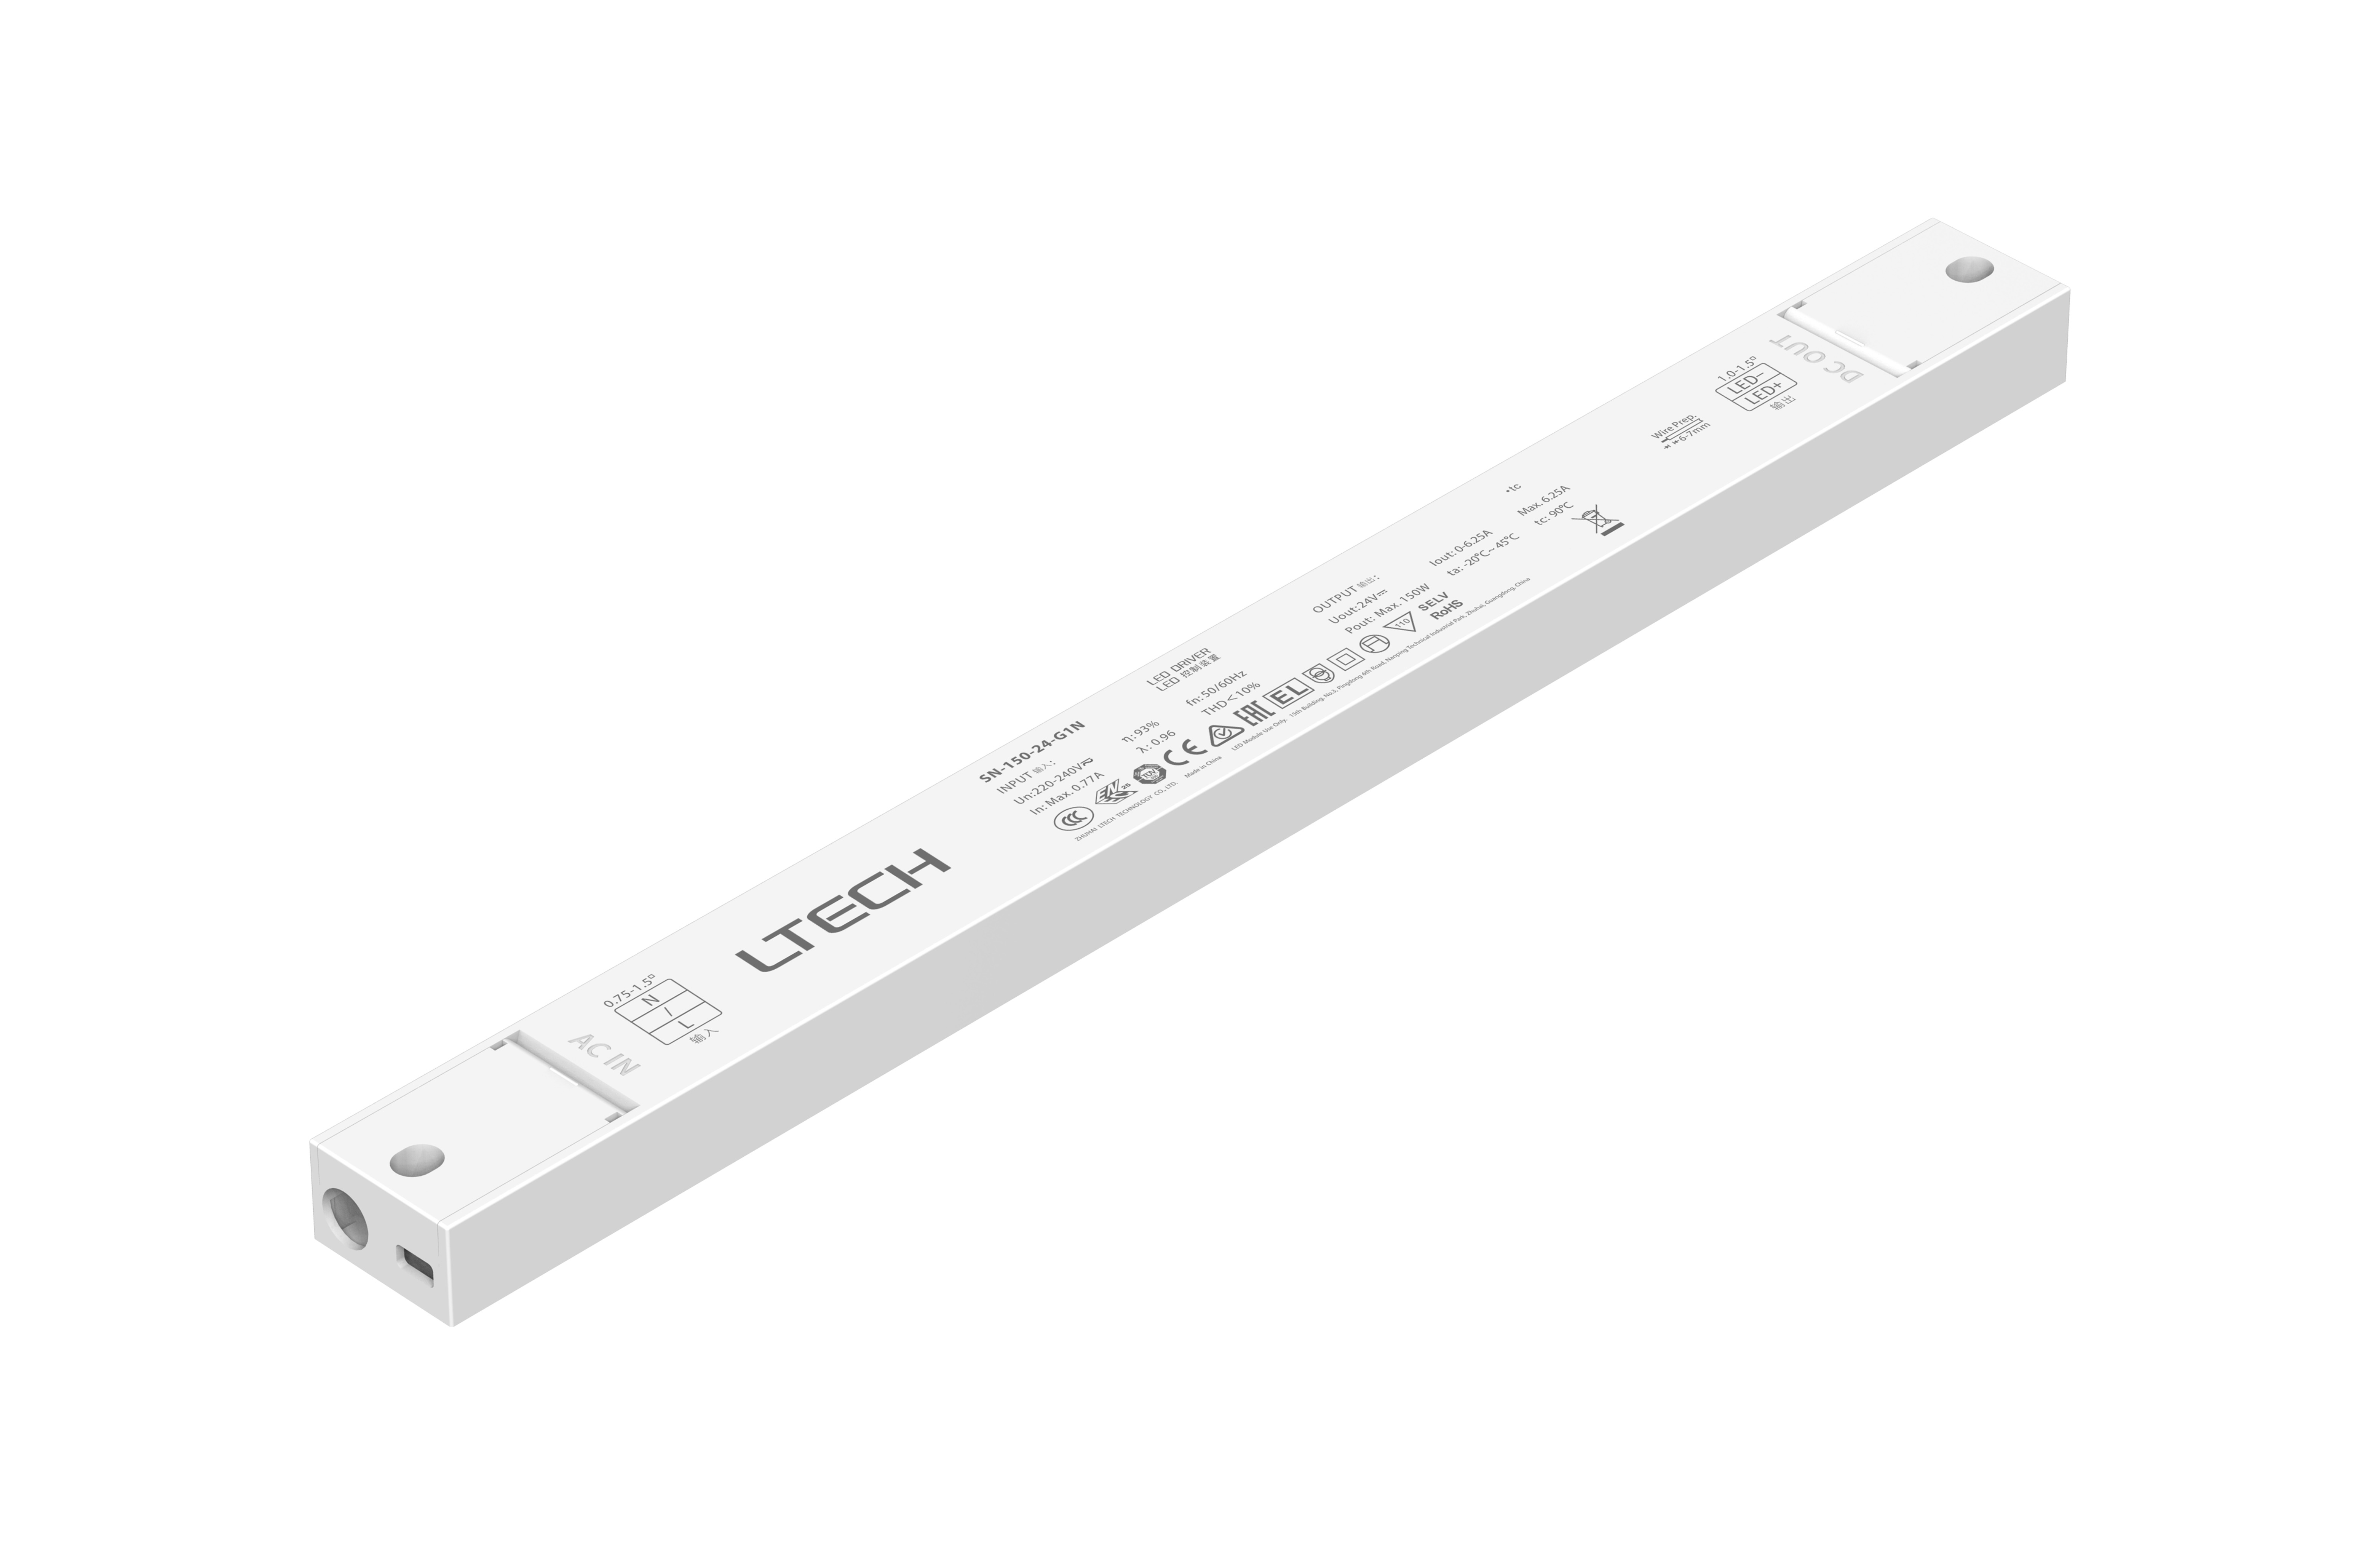 SN-150-24-G1N  Intelligent Constant Voltage  LED Driver, ON/OFF, 150W, 24VDC 6.25A , 220-240Vac, IP20, 5yrs Warrenty.